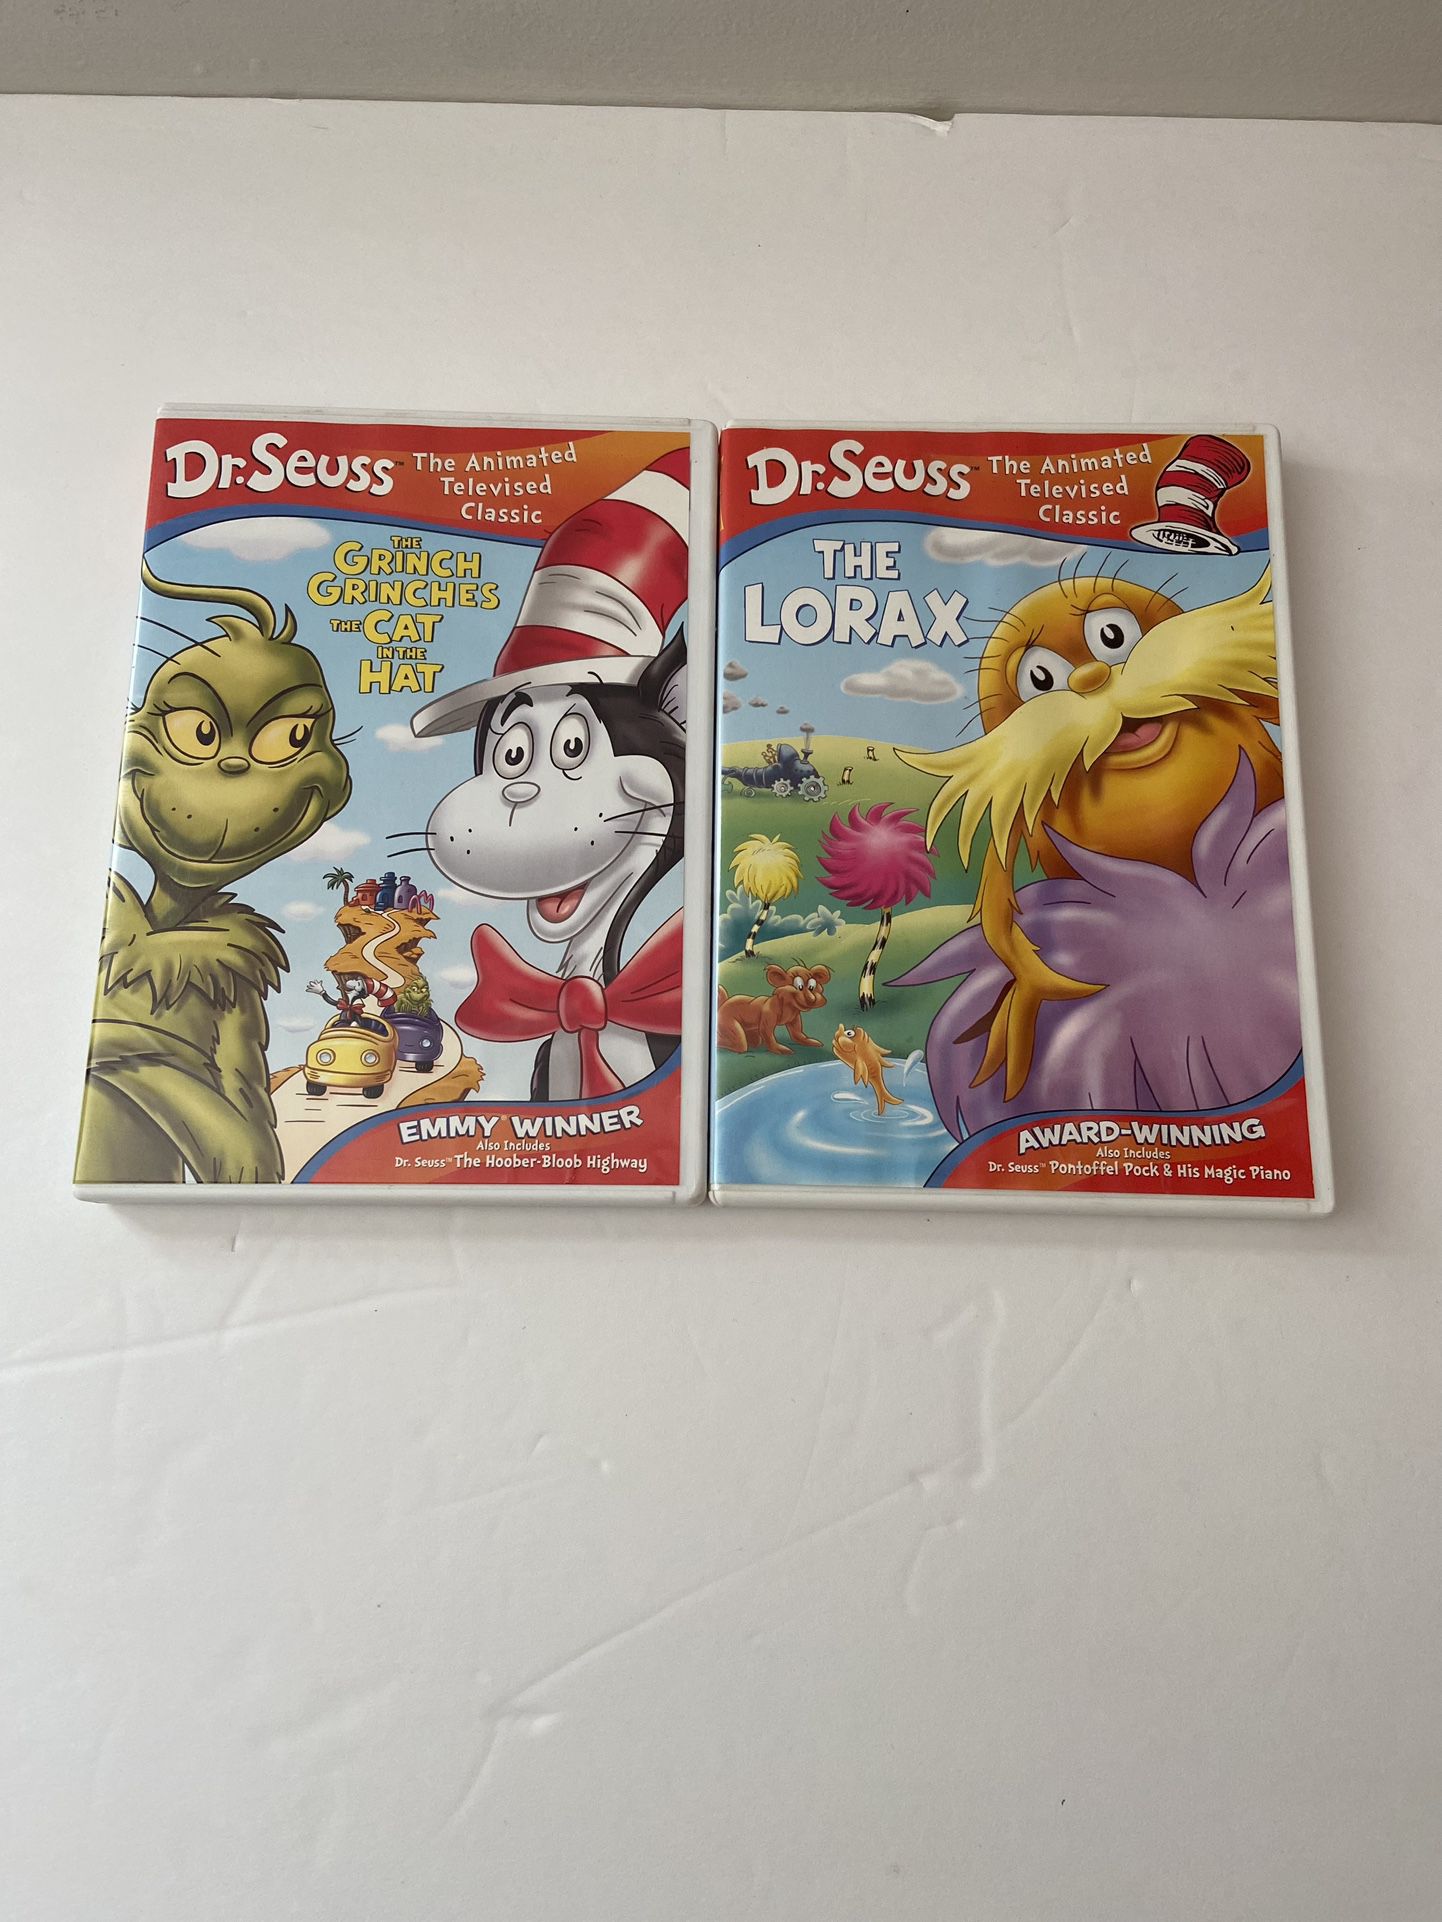 Dr. Seuss The Animated Televised Classics 2 Used DVDs